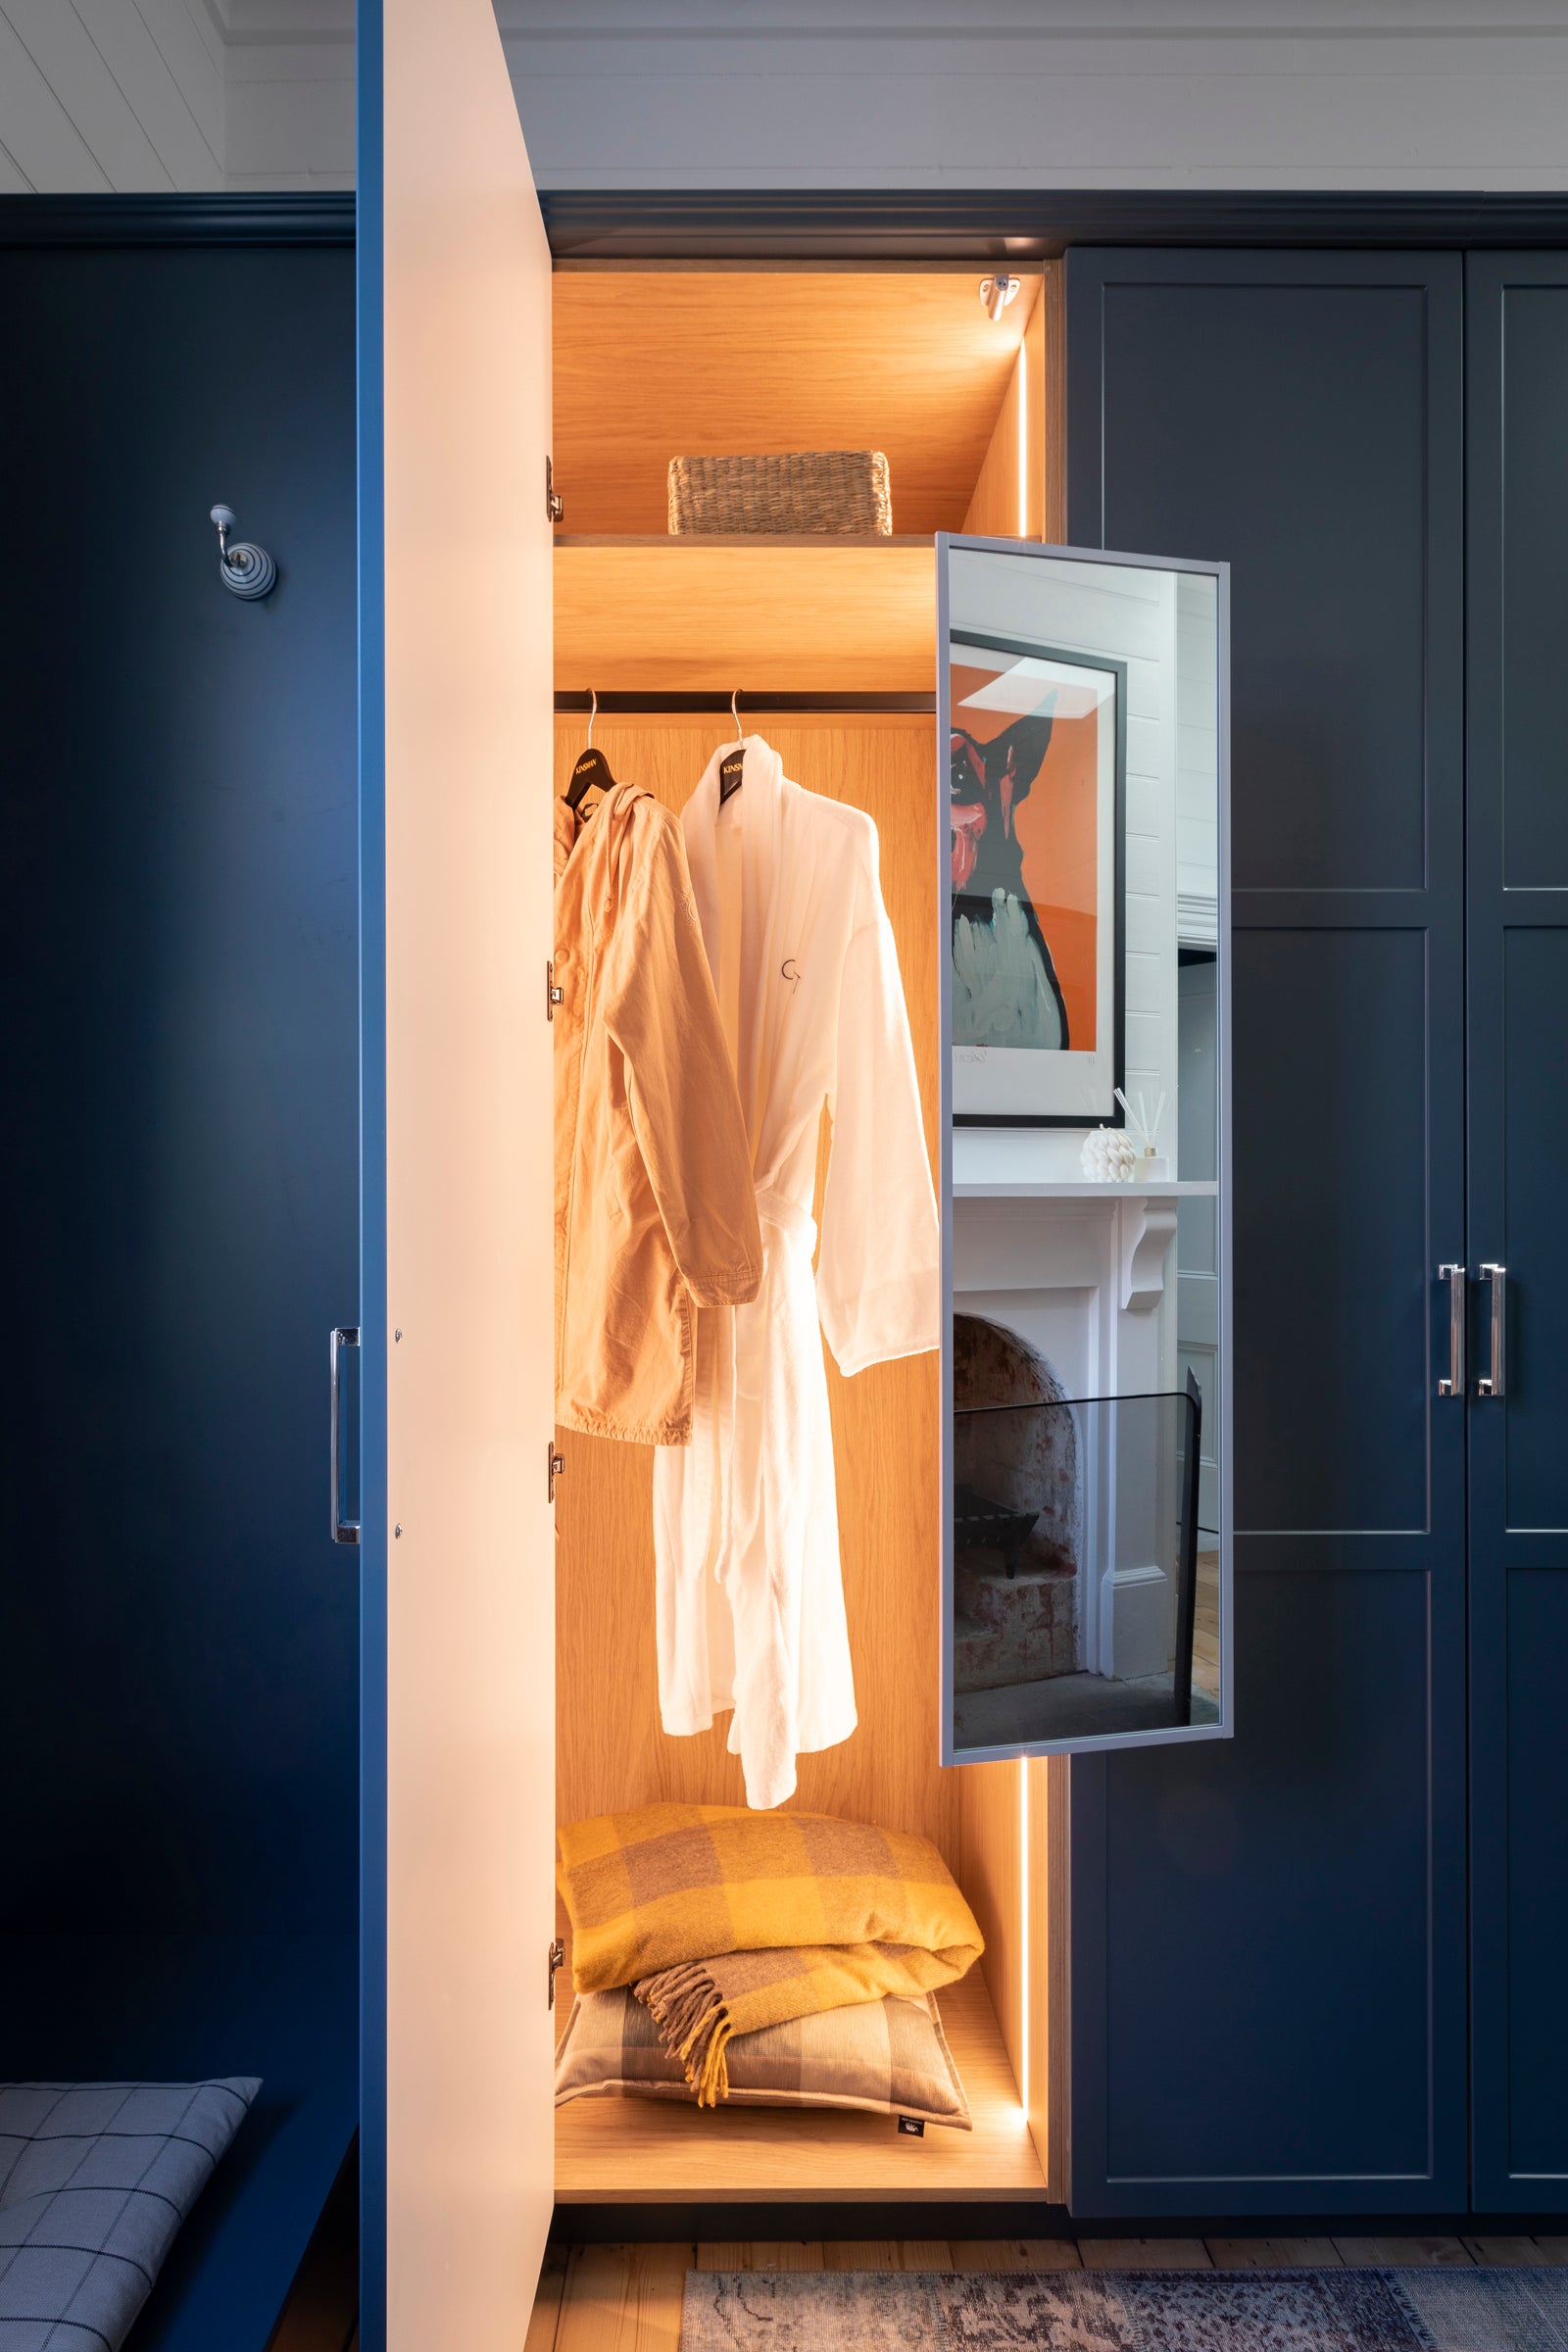 Create your dream wardrobe with clever storage ideas.